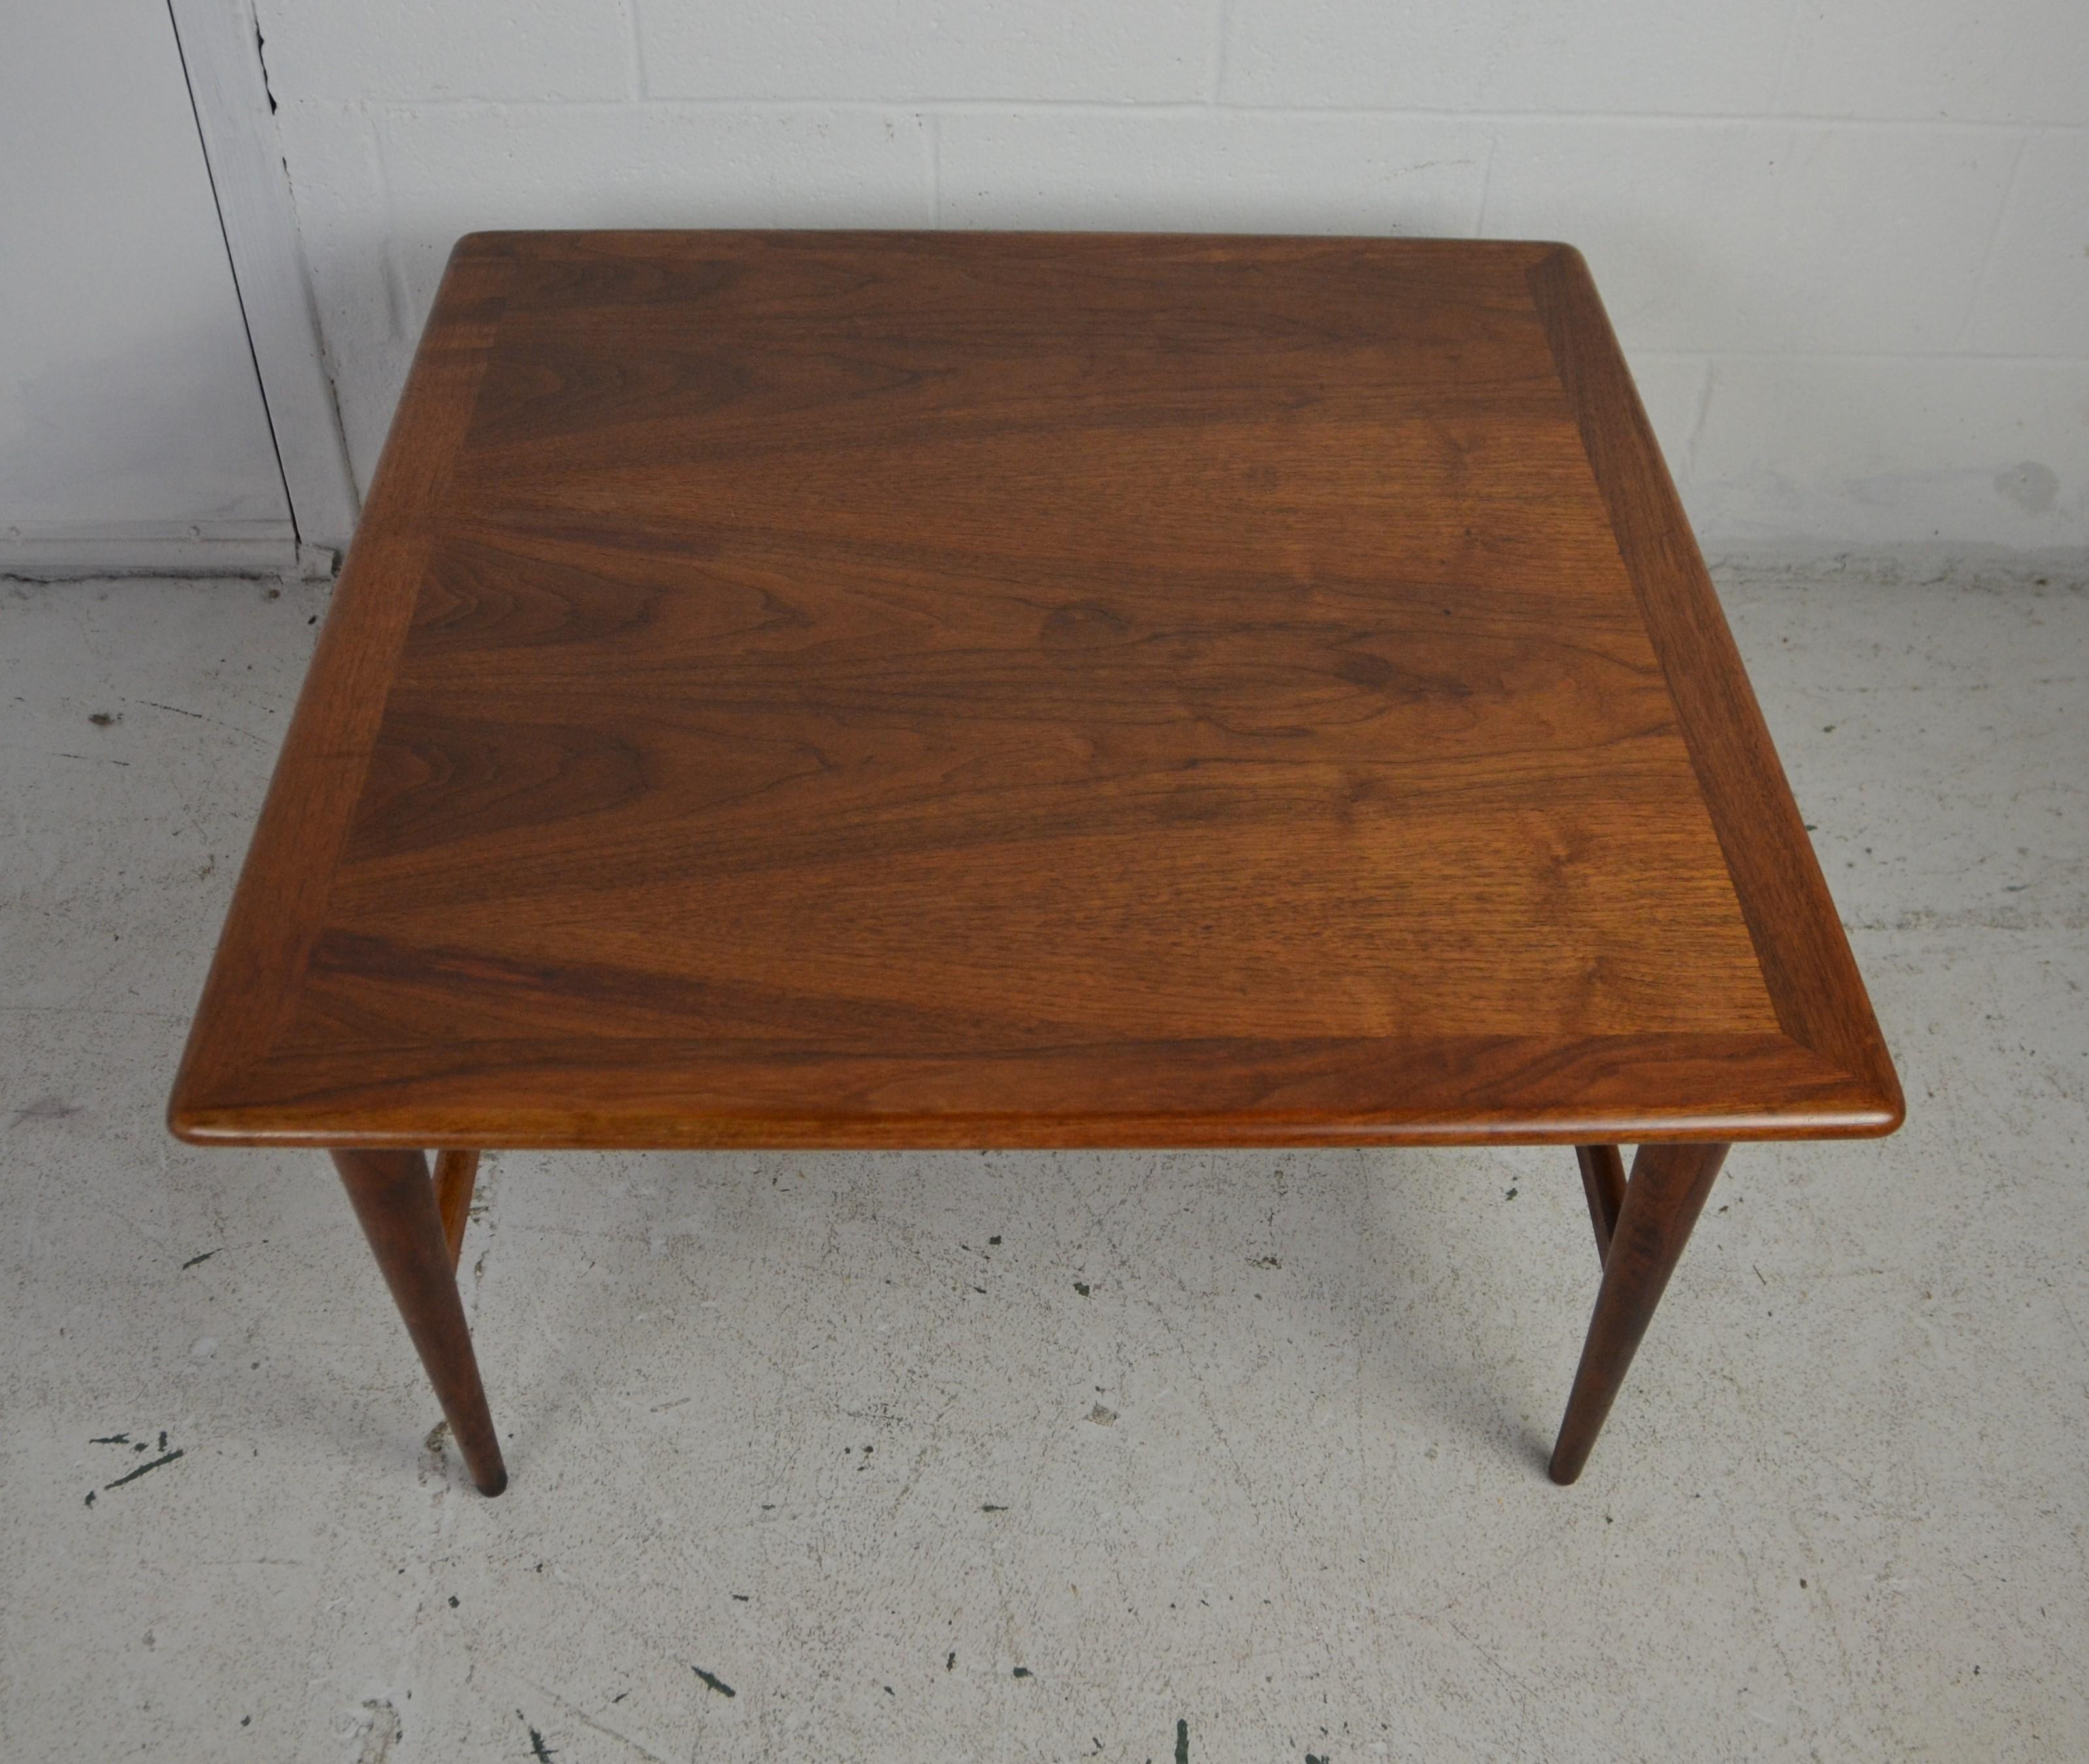 Midcentury coffee table with stretcher base.